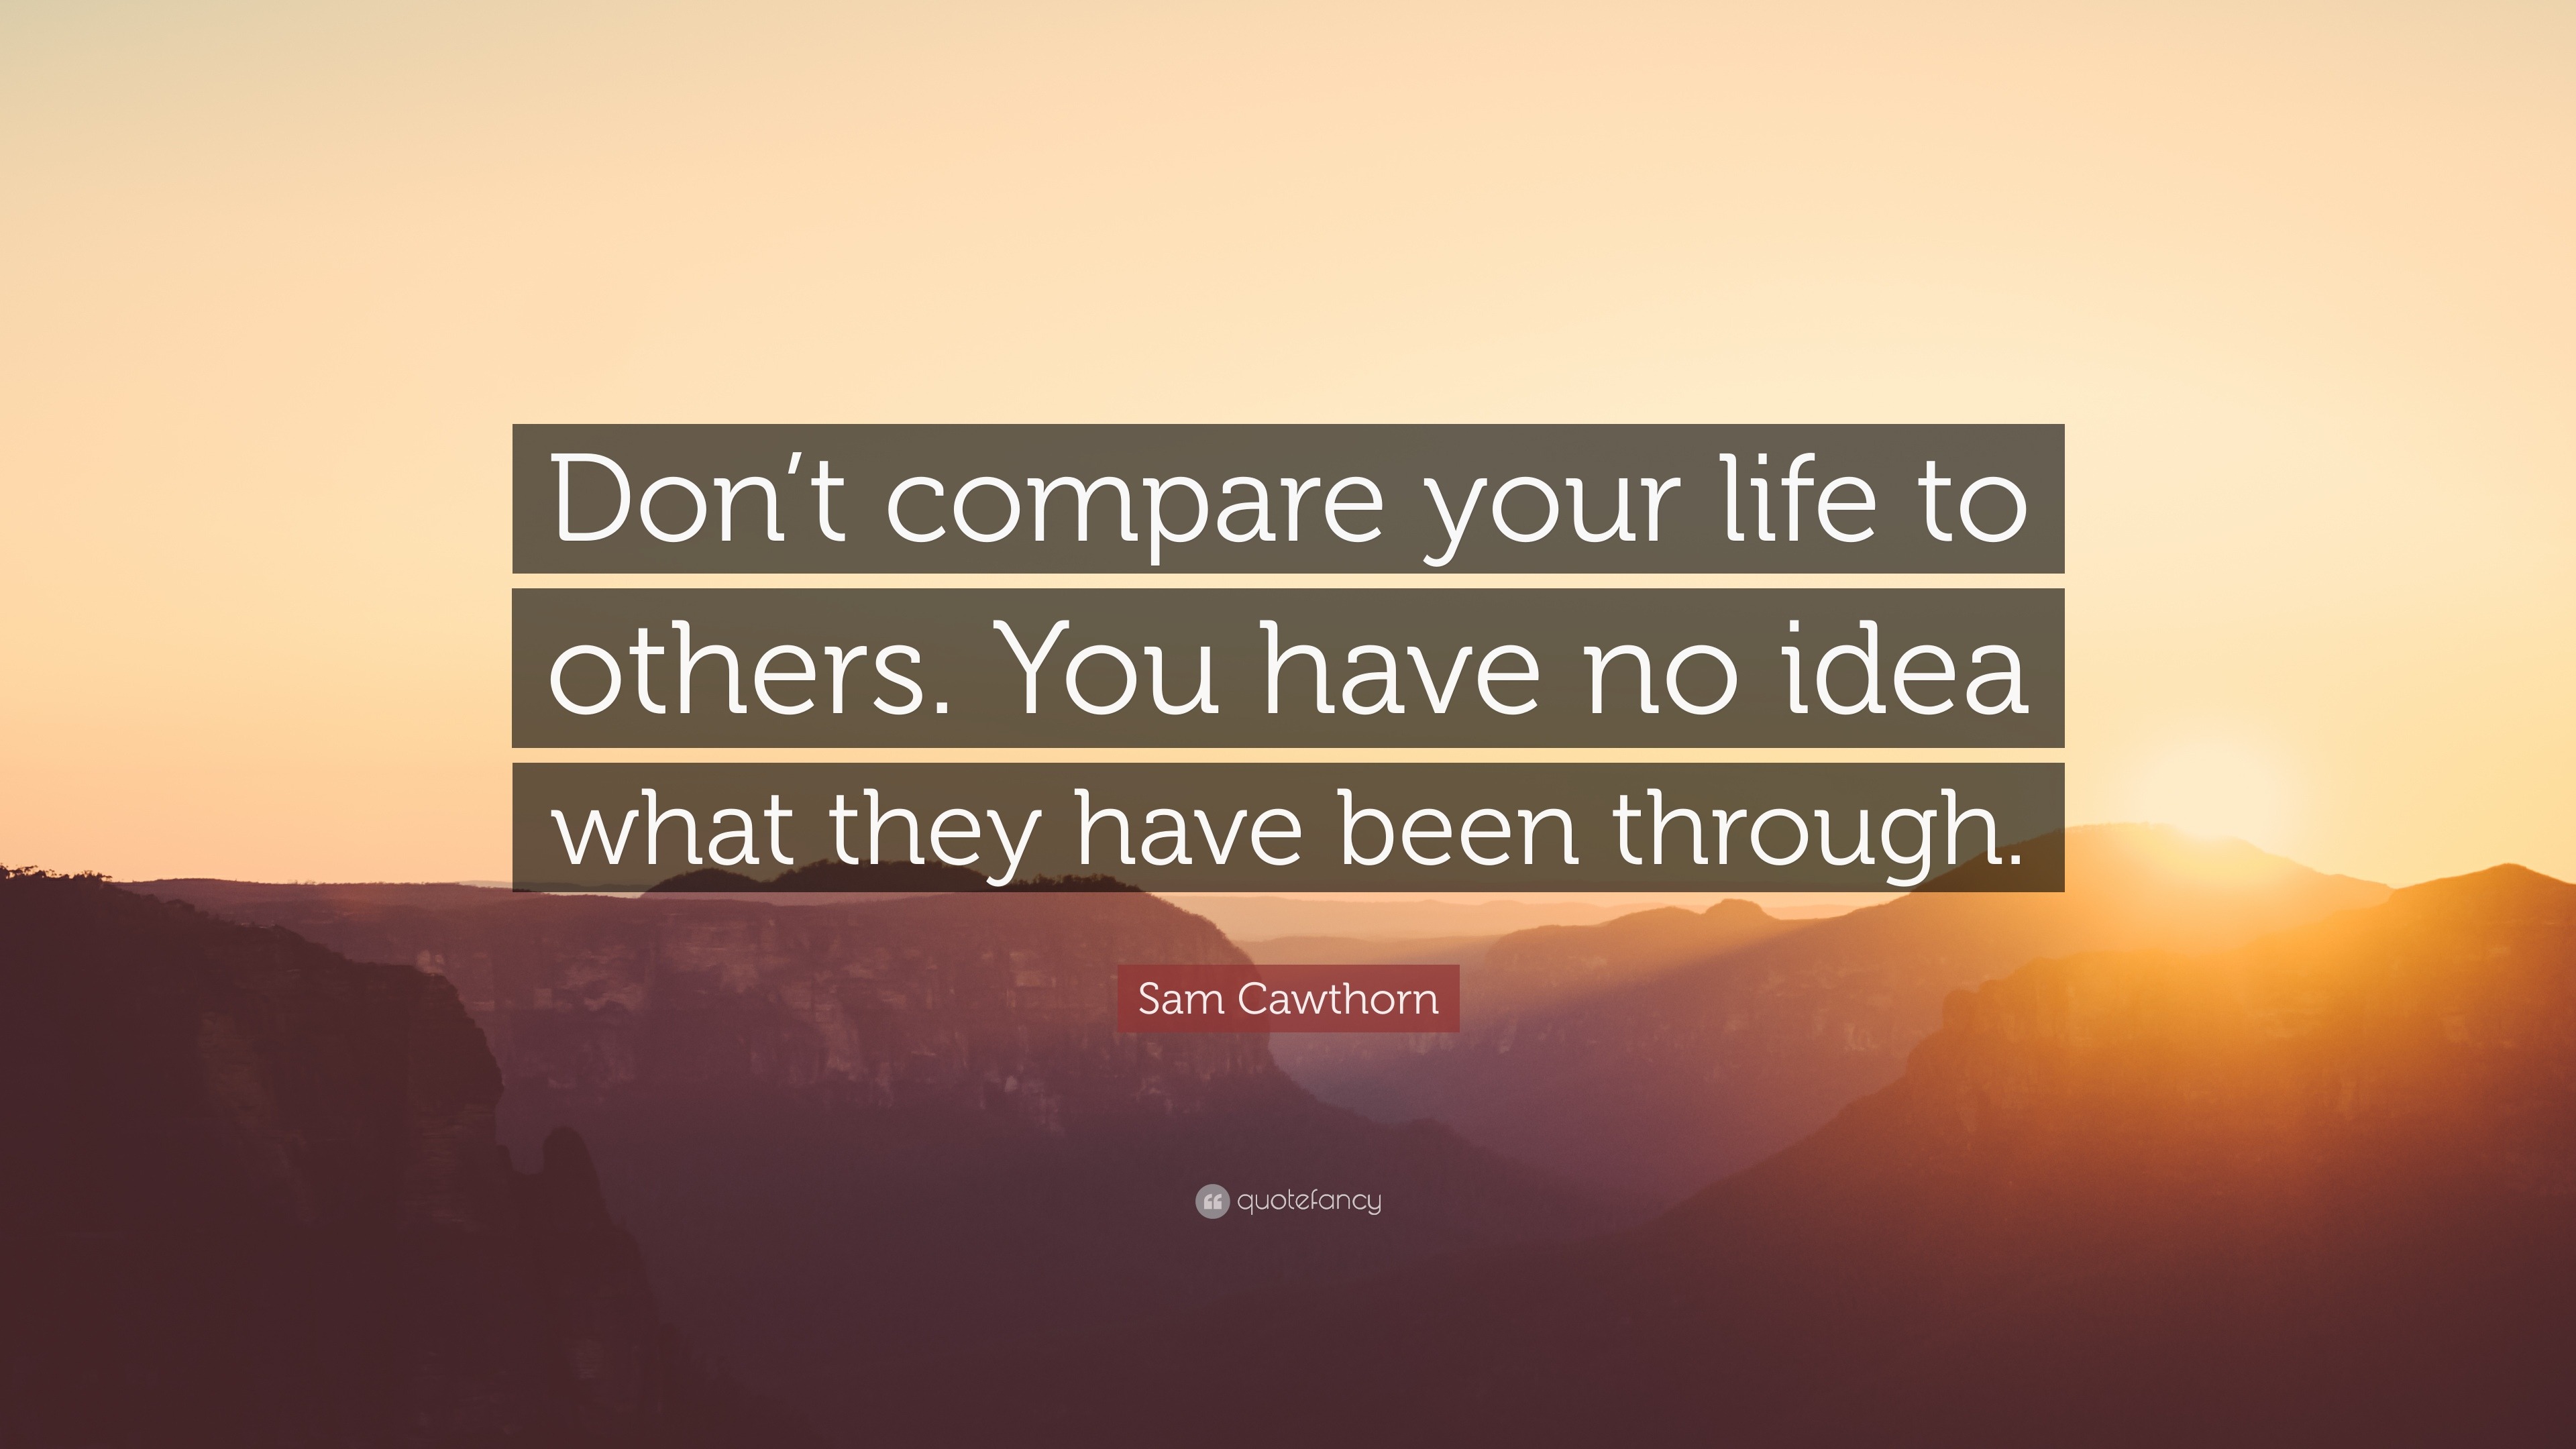 Sam Cawthorn Quote: “Don&#39;t compare your life to others. You have no idea what they